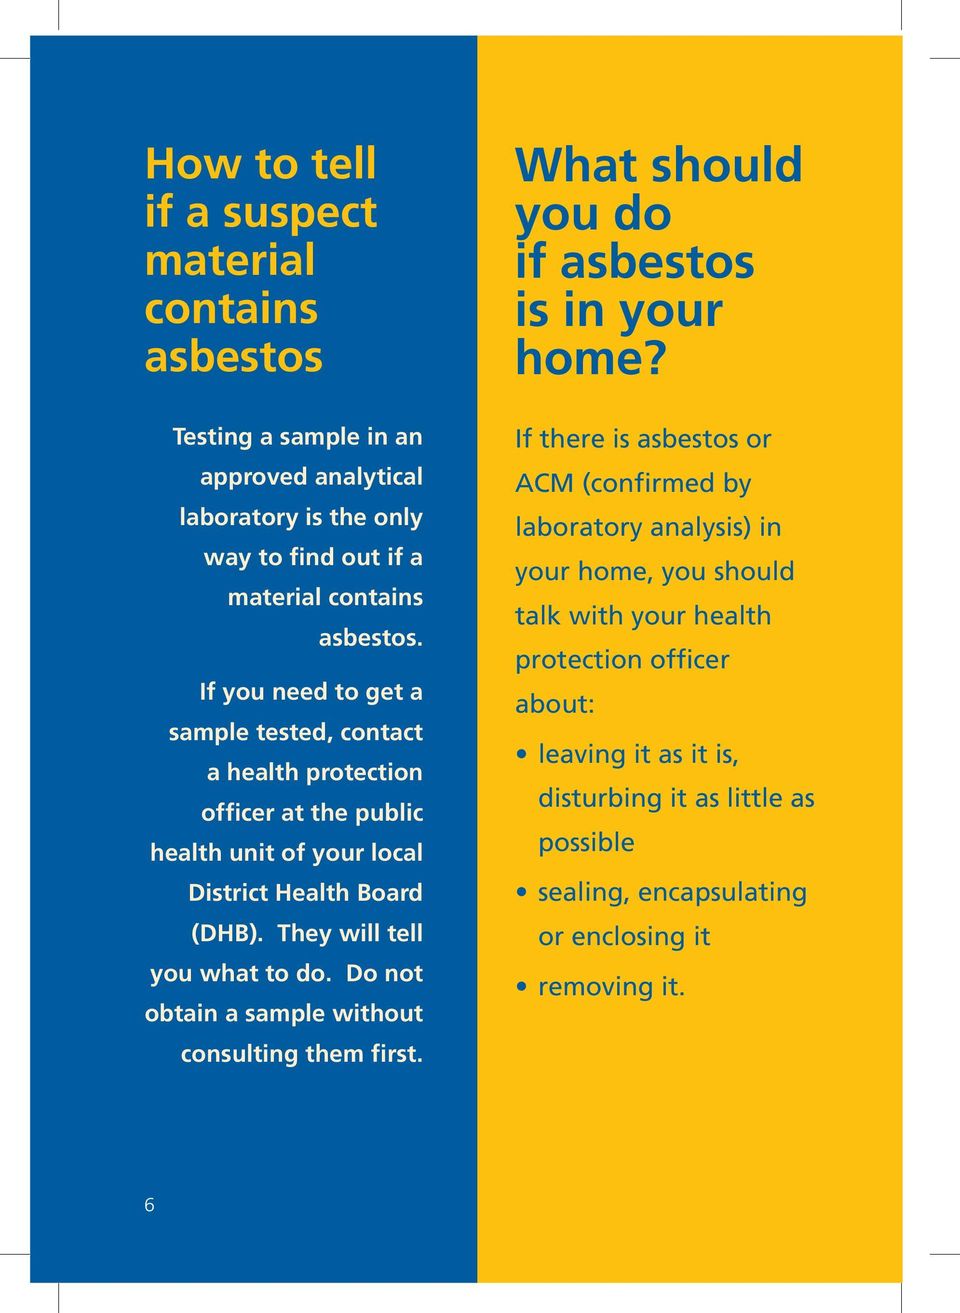 Do not obtain a sample without consulting them first. What should you do if asbestos is in your home?